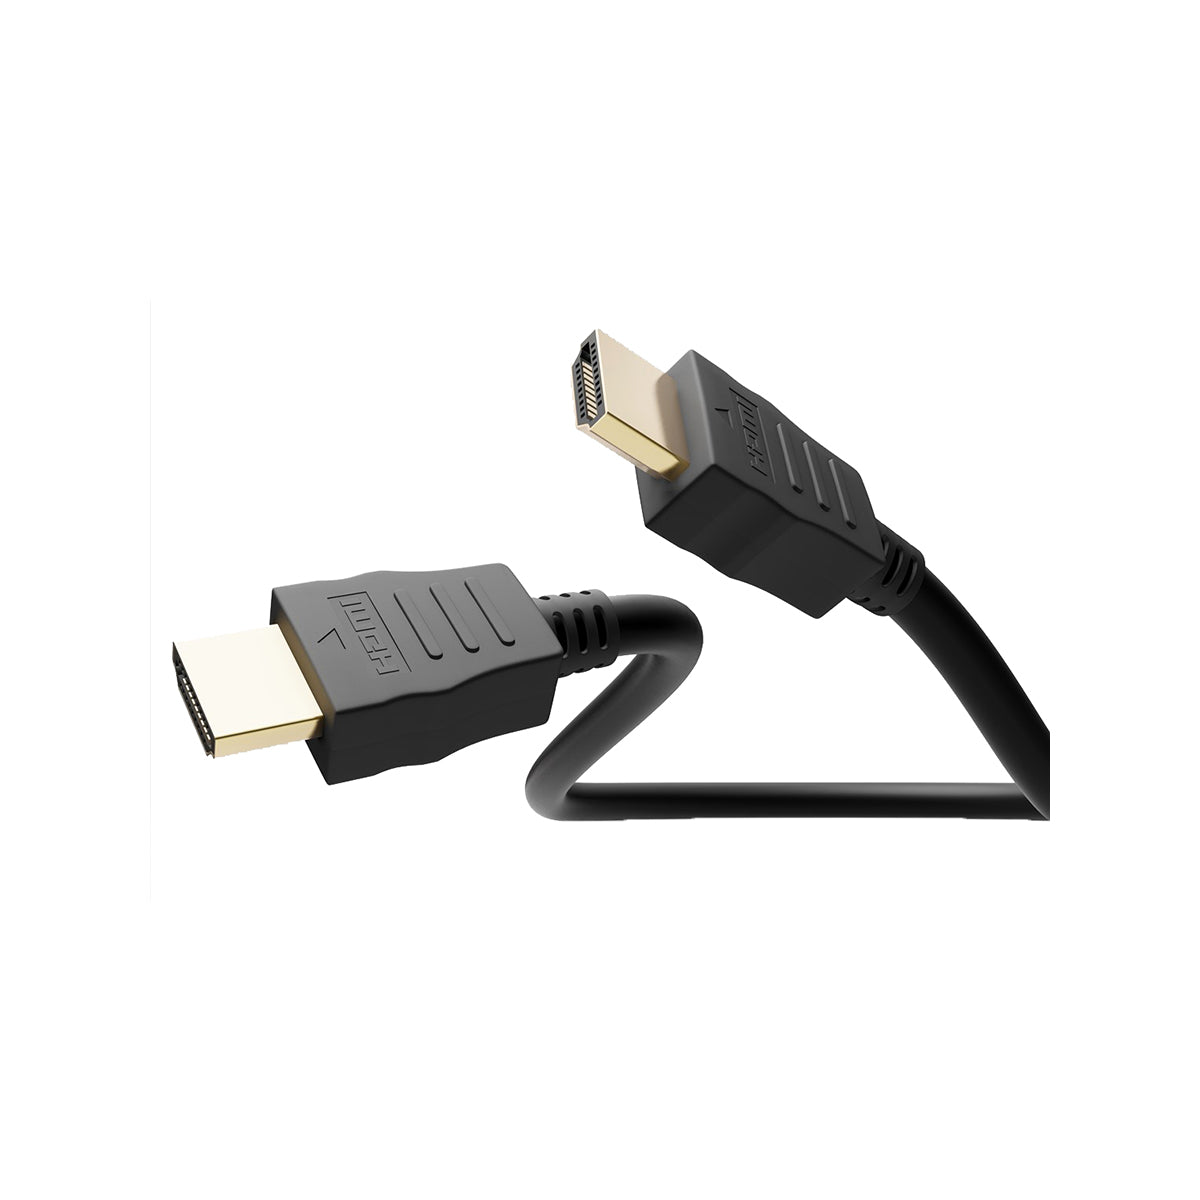 Goobay High Speed HDMI™ Cable with Ethernet (4K@60Hz) 5M for Laptops